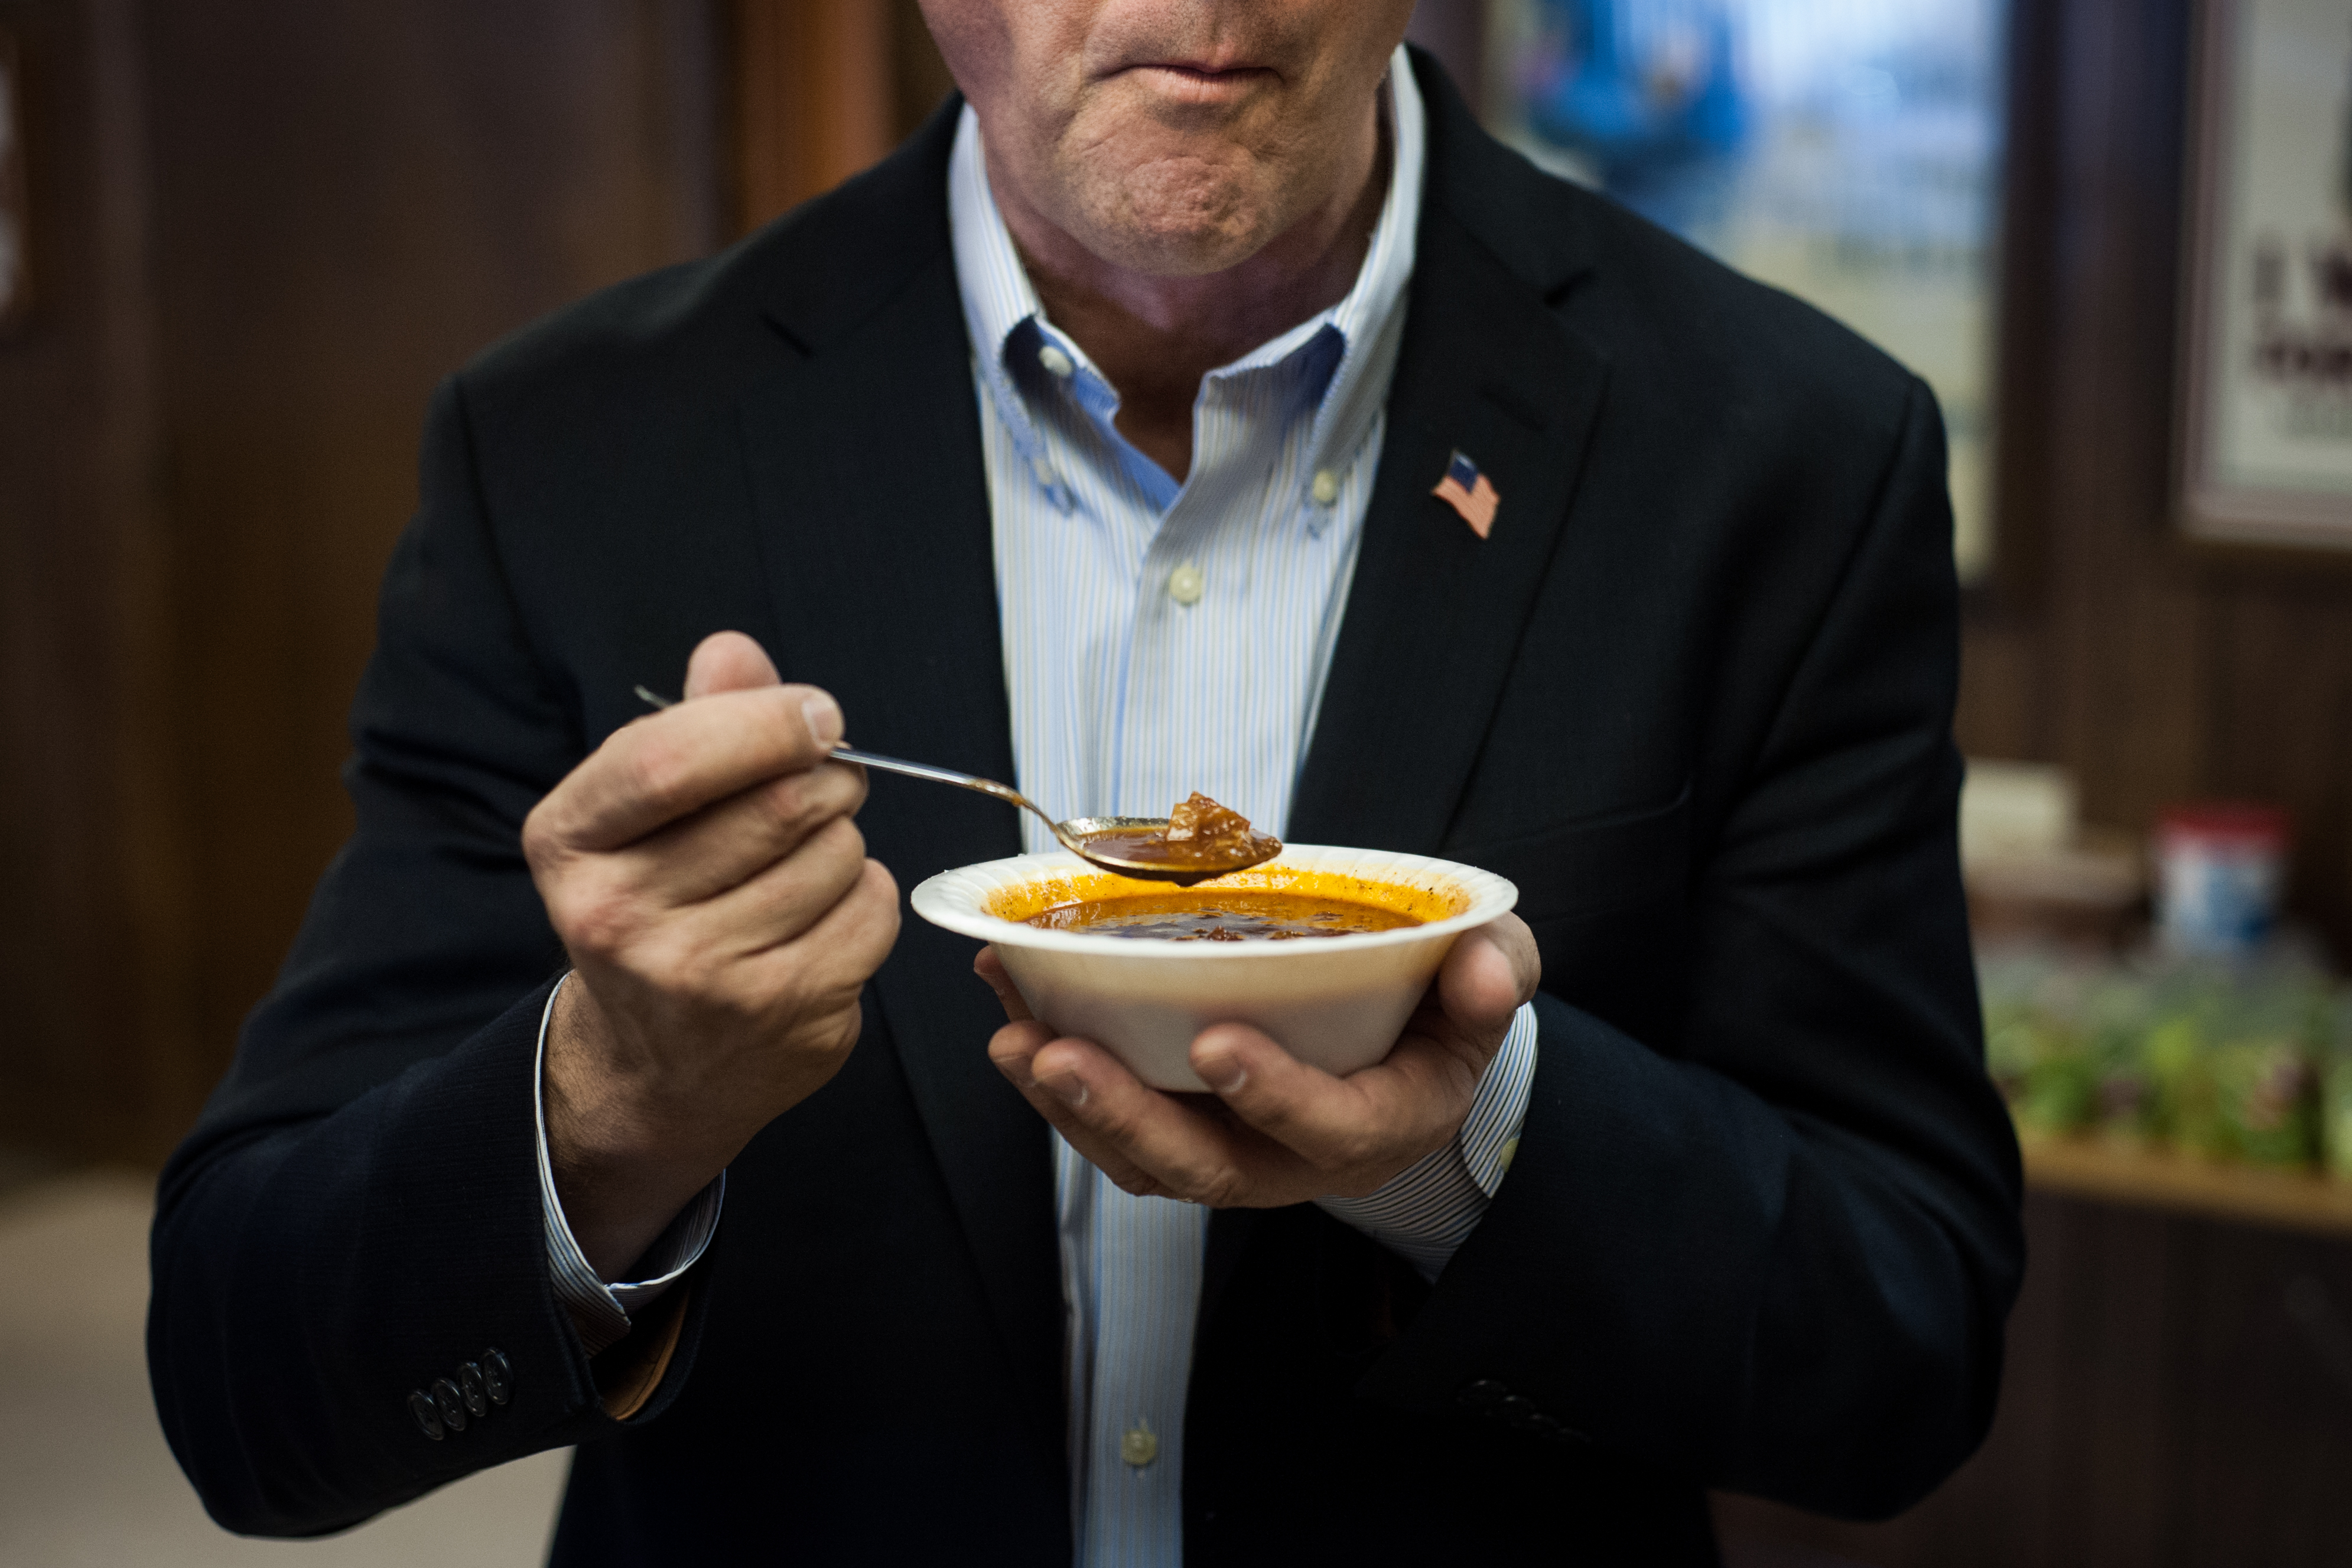 Democratic presidential candidate Governor Martin O'Malley eats a bowl of chili after speaking at the Hardin County 2016 Chili Spectacular at the Iowa Falls American Legion in Iowa Falls, Iowa on Jan. 10, 2016.